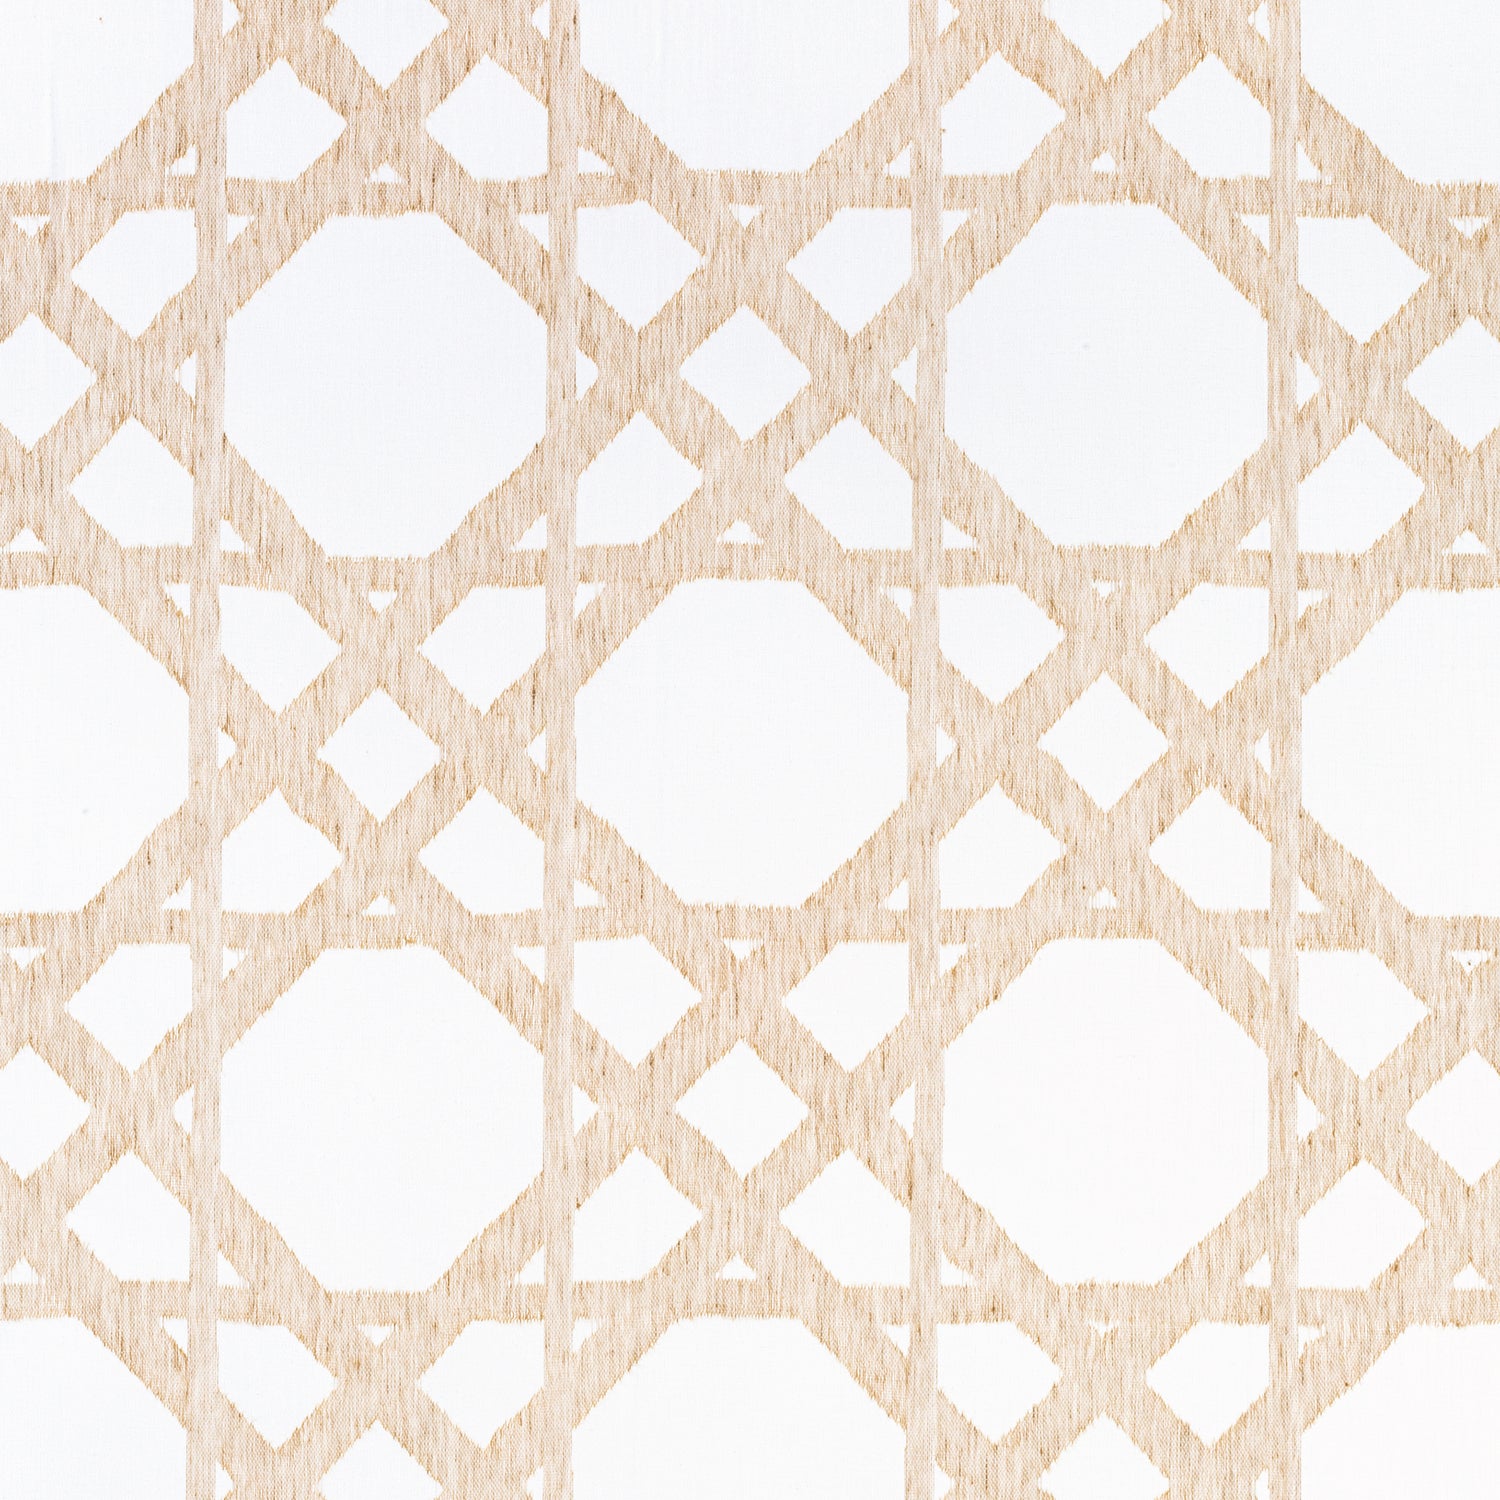 Cyrus Cane Sheer fabric in sand color - pattern number FWW7133 - by Thibaut in the Atmosphere collection